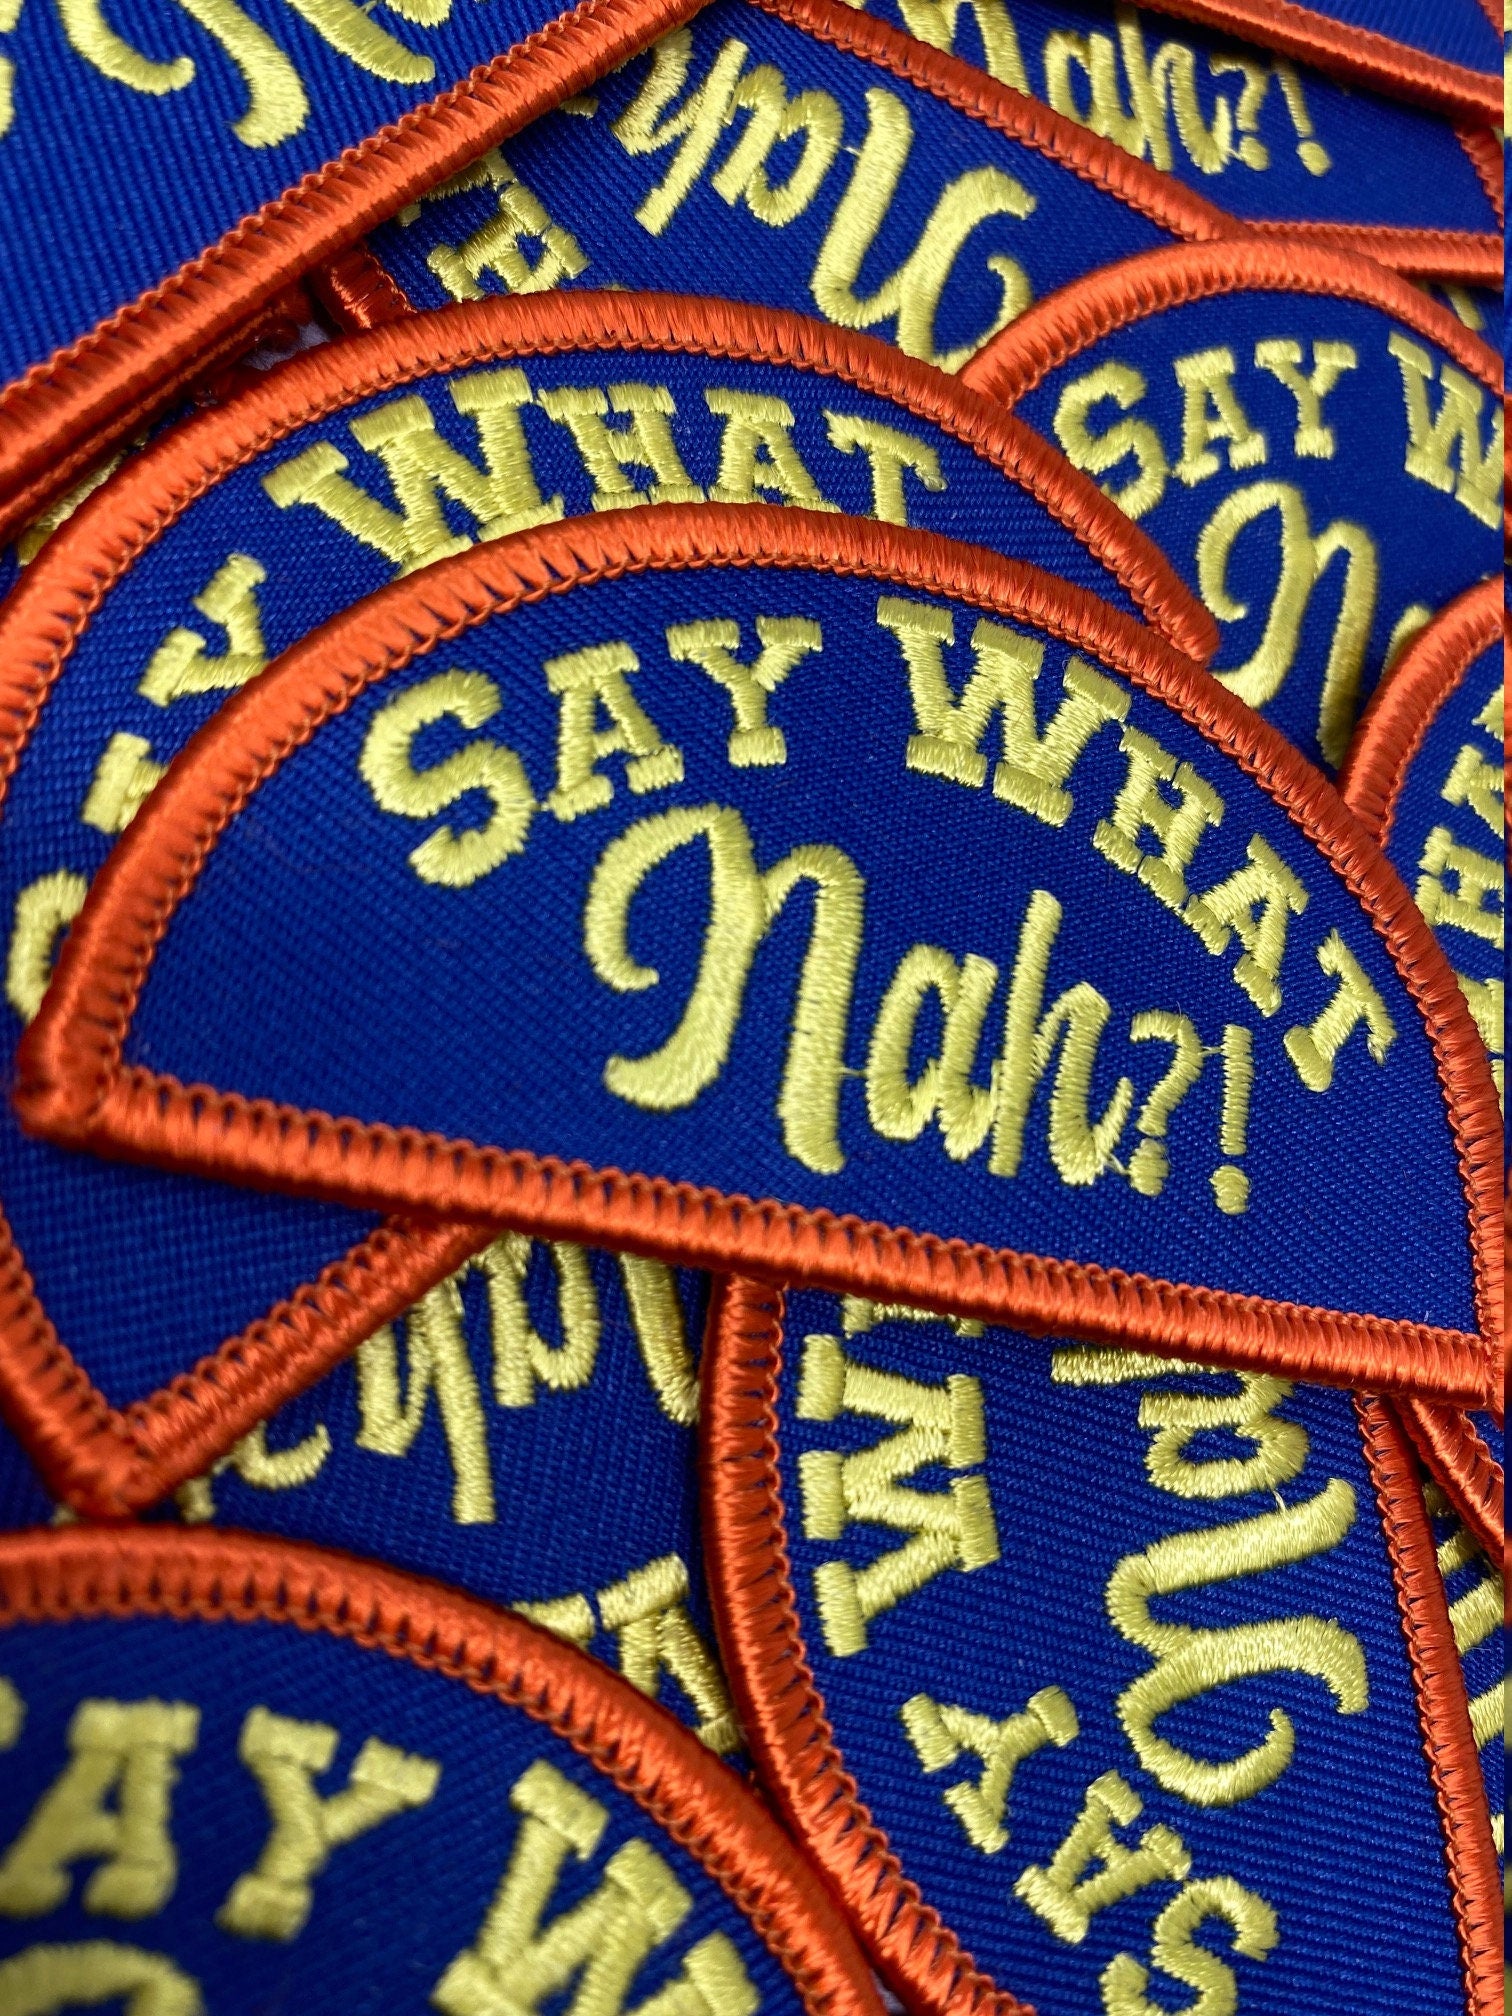 New Arrival, Exclusive Orange, Yellow and Blue "Say What Now," Size 3", Iron-on Patch,Applique for Clothing, Patch for Hats, and Jackets